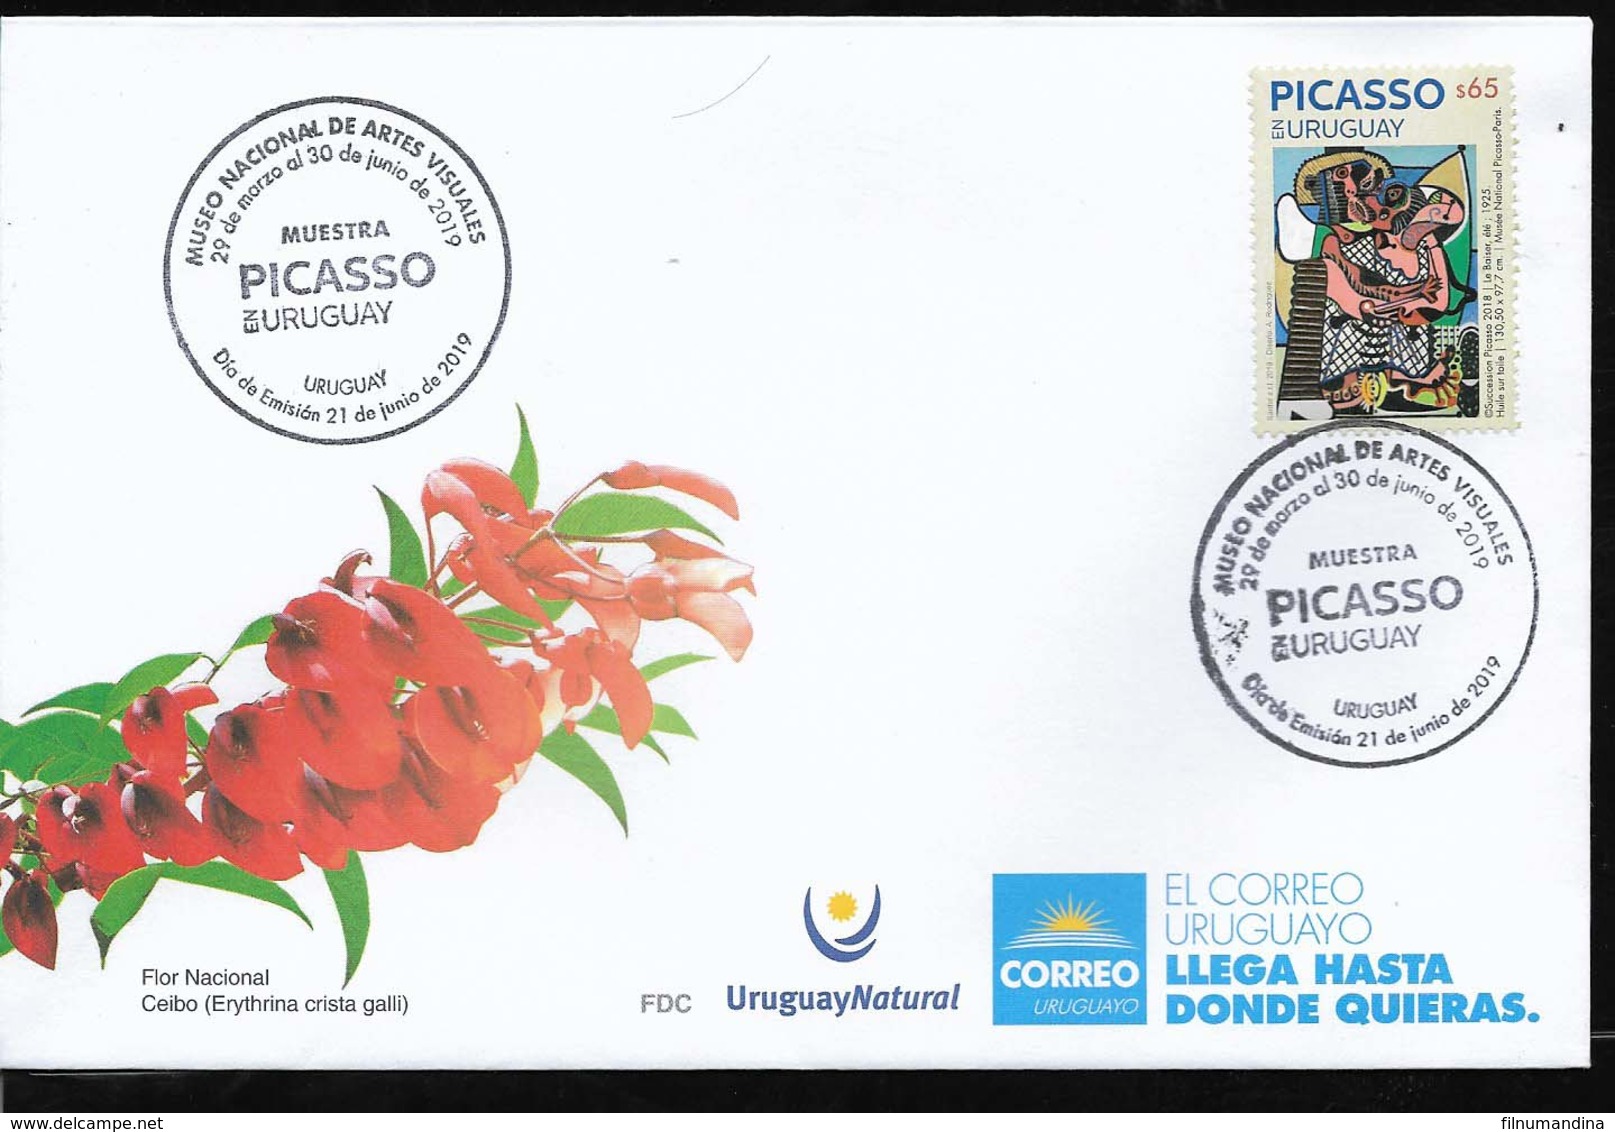 URUGUAY 2019 PABLO PICASSO PAINTING EXPO  FDC - Picasso